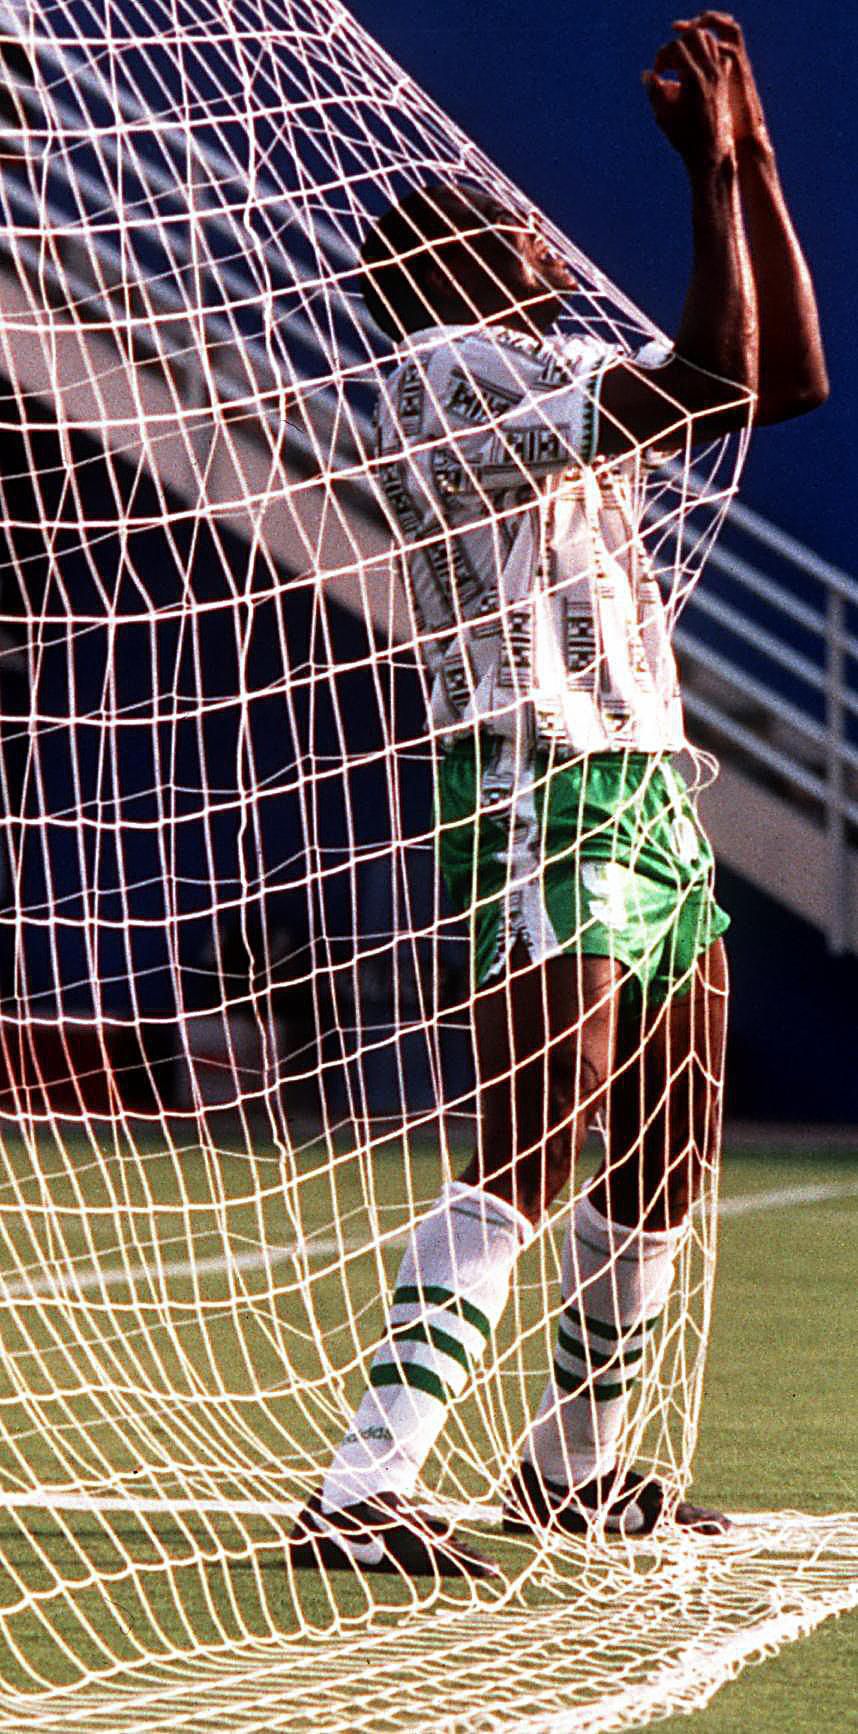 Nigeria's Rashidi Yekini celebrates in the net after scoring his nation's first goal of their game against Bulgaria during their World Cup game at the Cotton Bowl in June 1994.